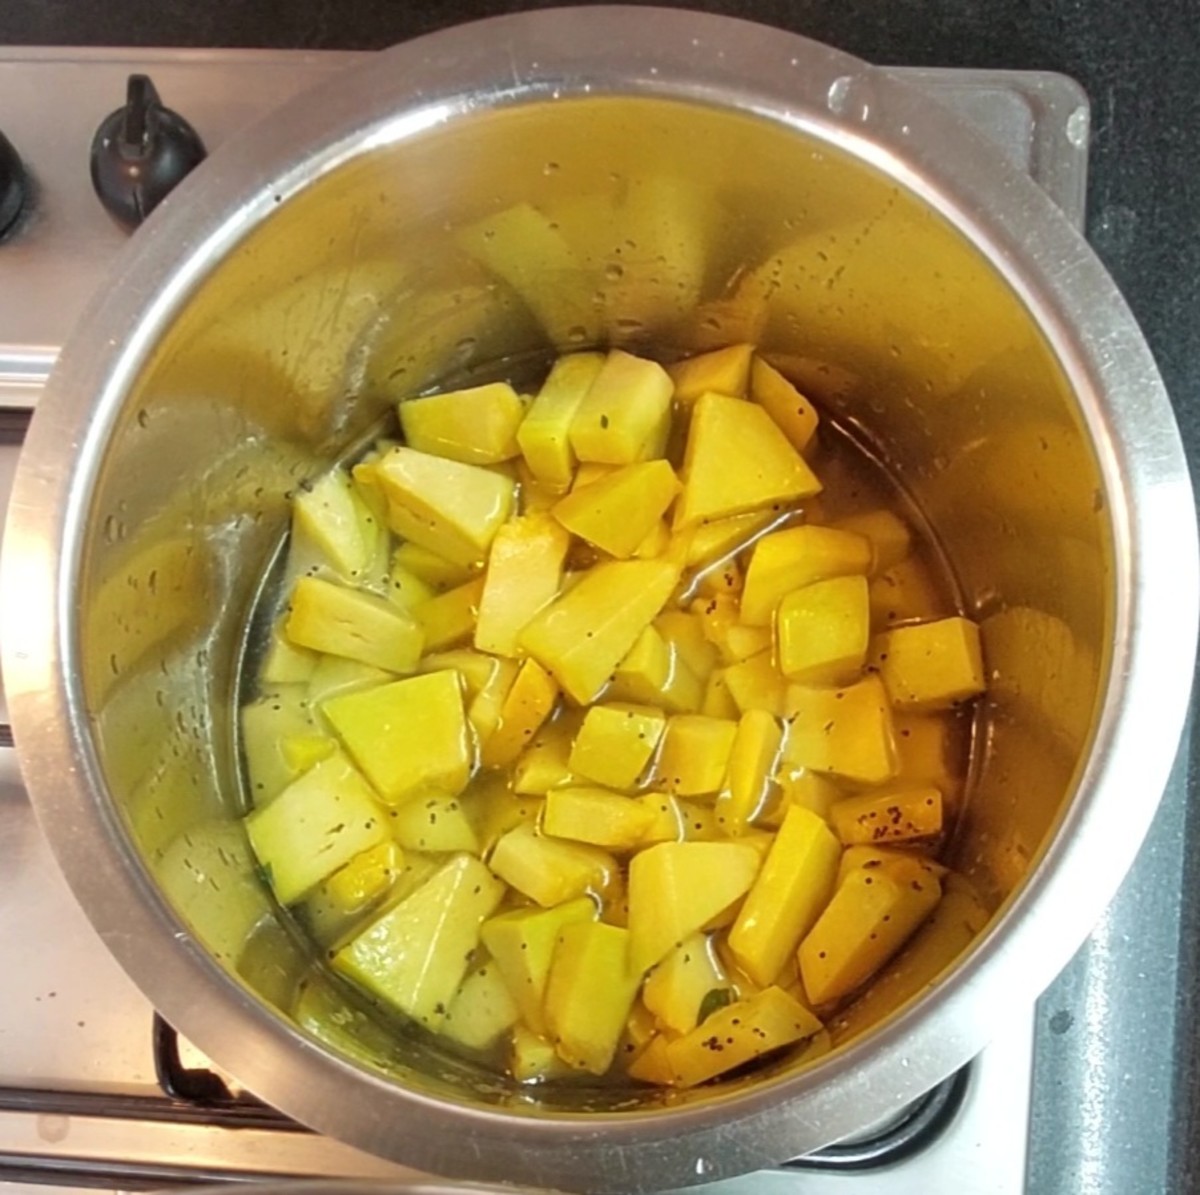 Add 2 cups cubed pumpkin and saute for a minute. Add 2 cups of water, salt to taste, close the lid and cook well.